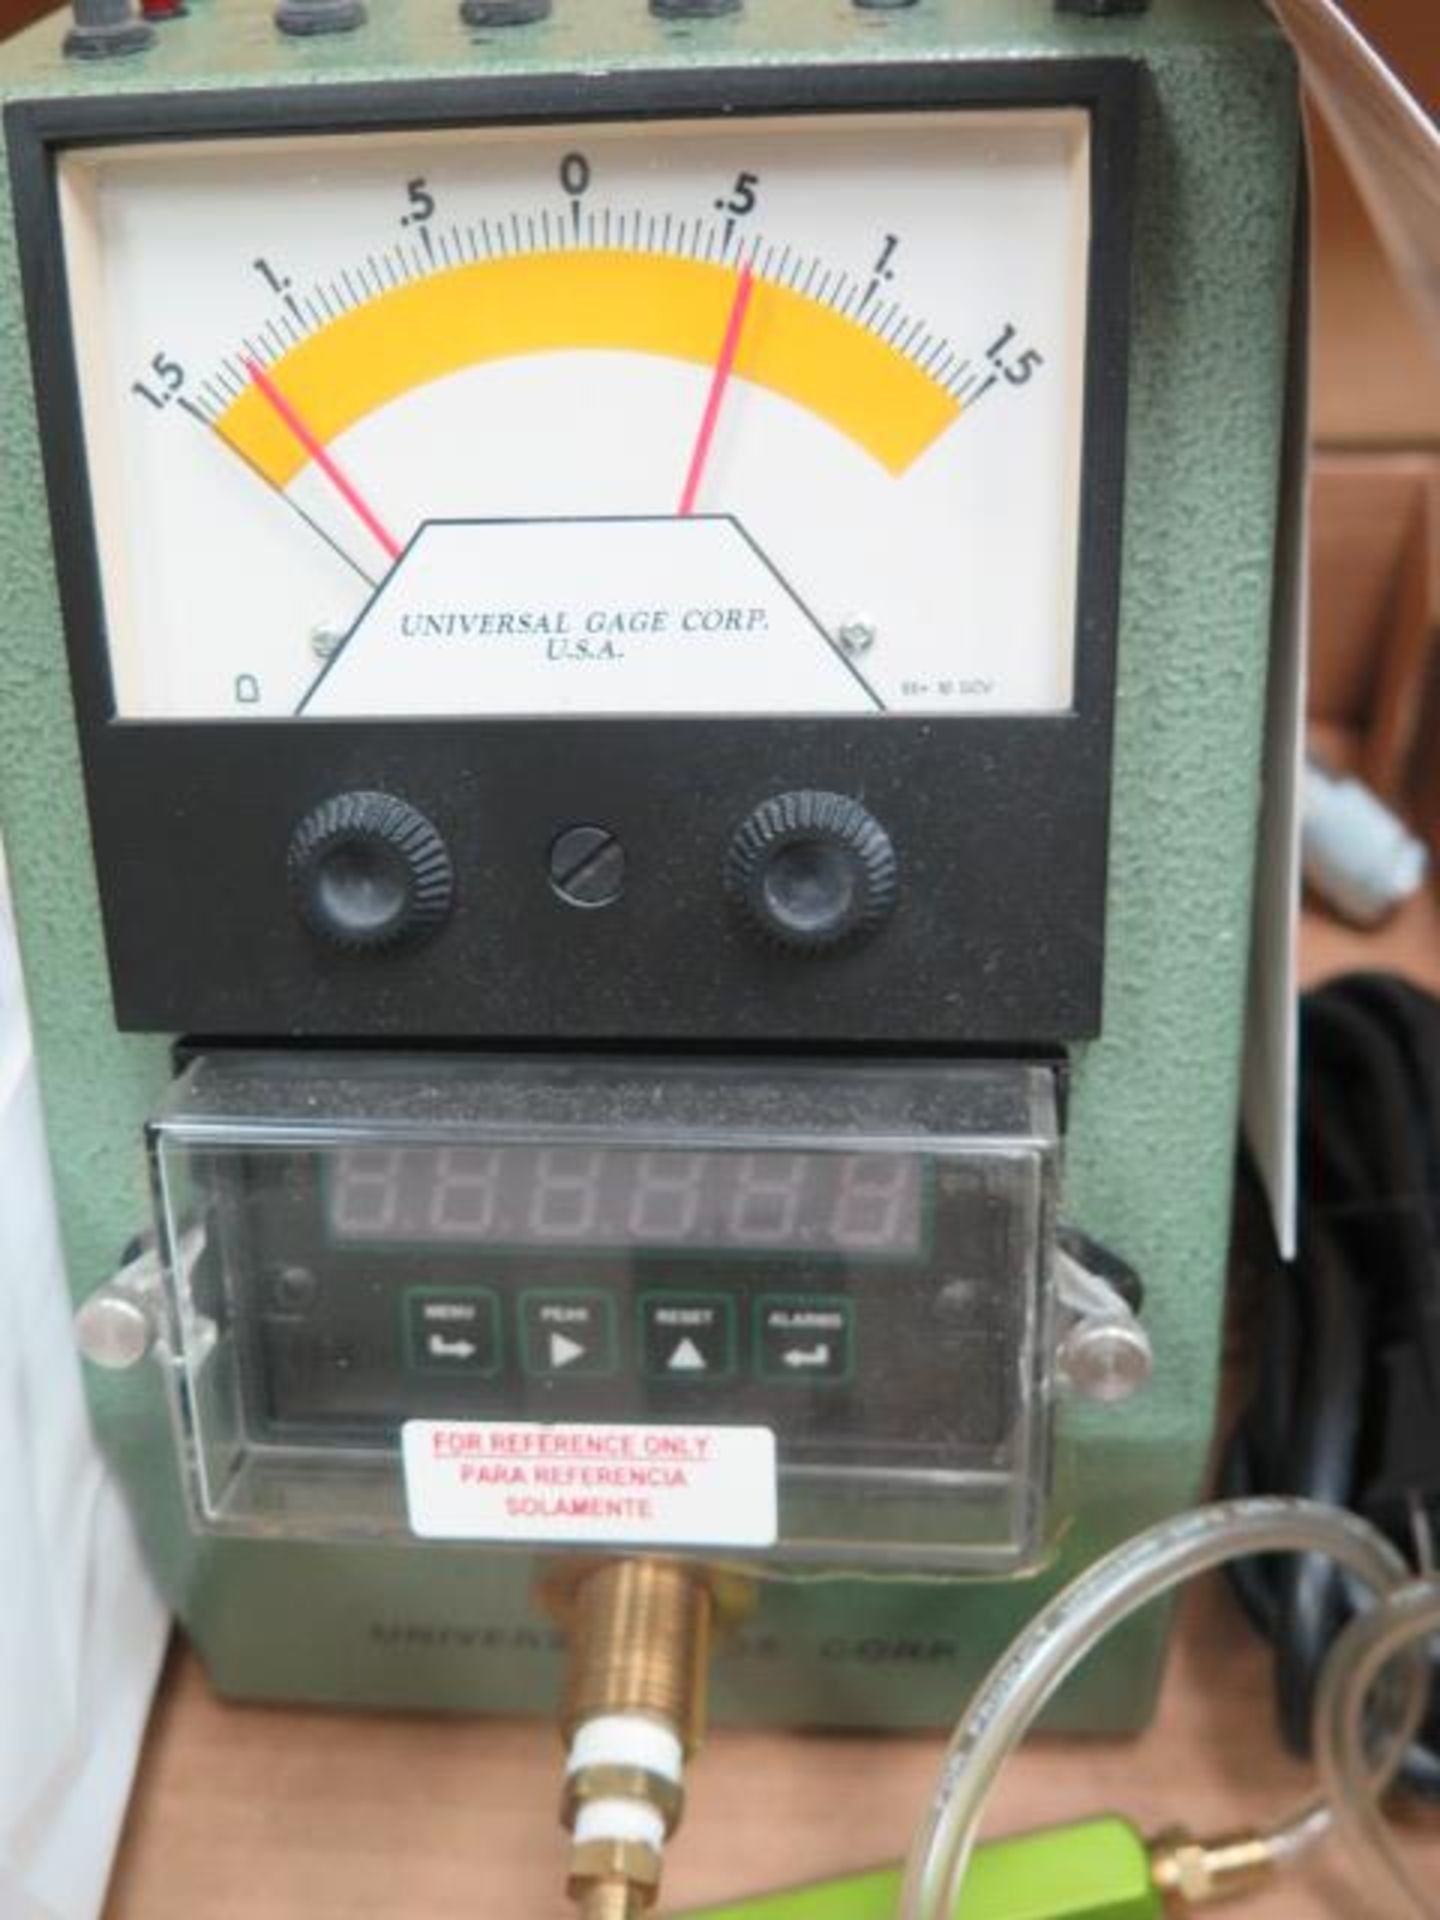 Universal Gage Corp mdl. DR-1 Universal Digital Air Gage (SOLD AS-IS - NO WARRANTY) - Image 3 of 5